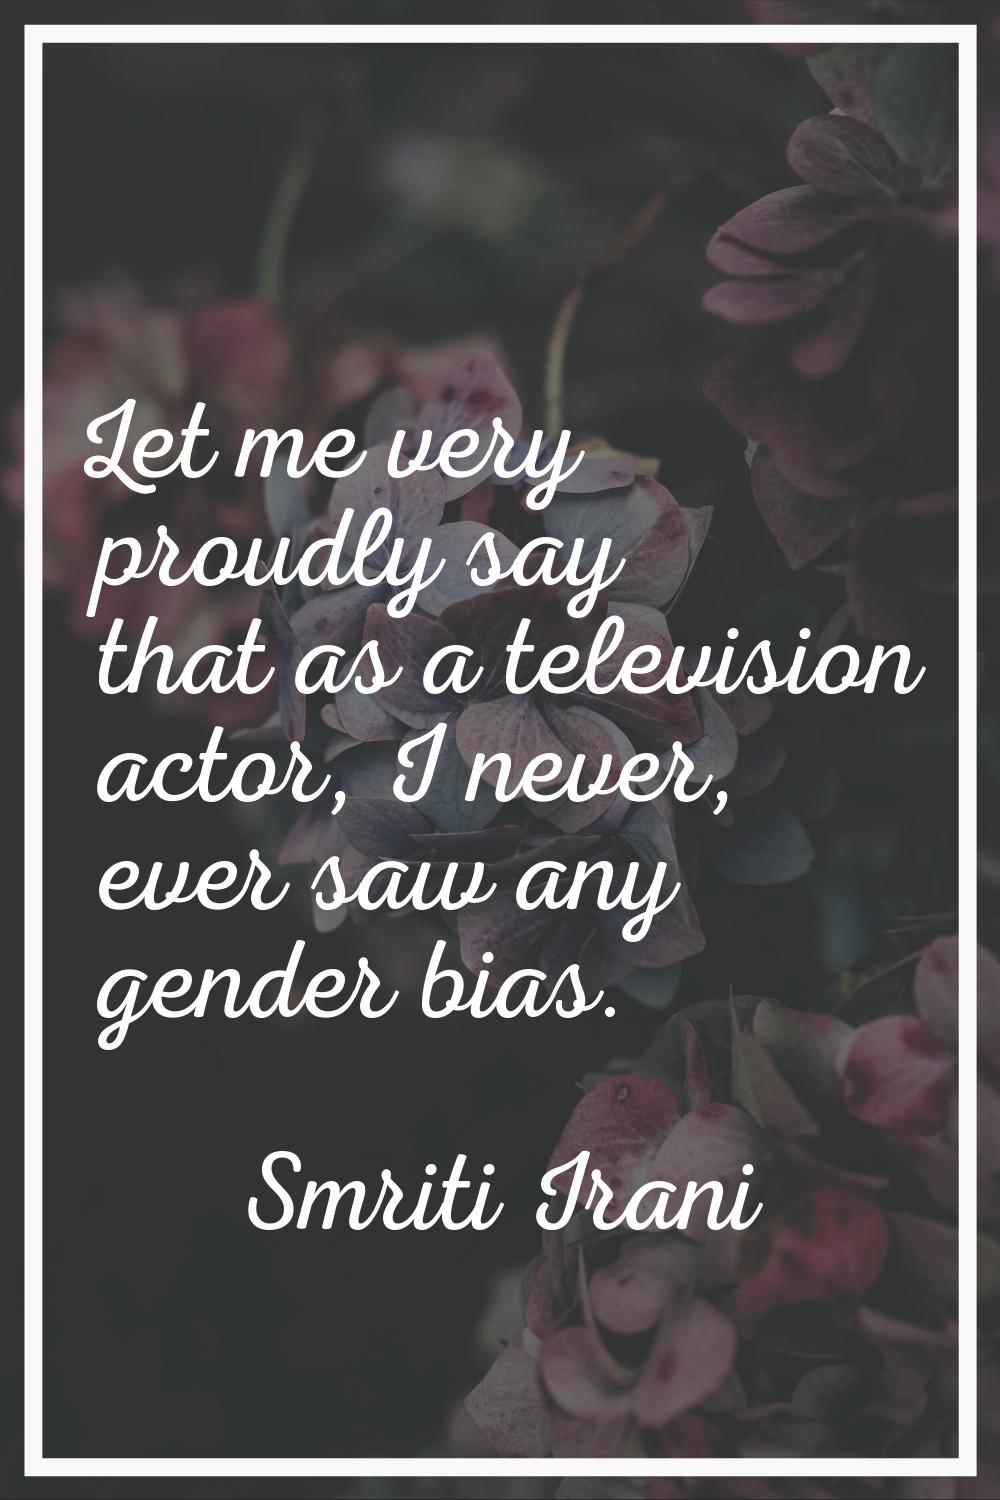 Let me very proudly say that as a television actor, I never, ever saw any gender bias.